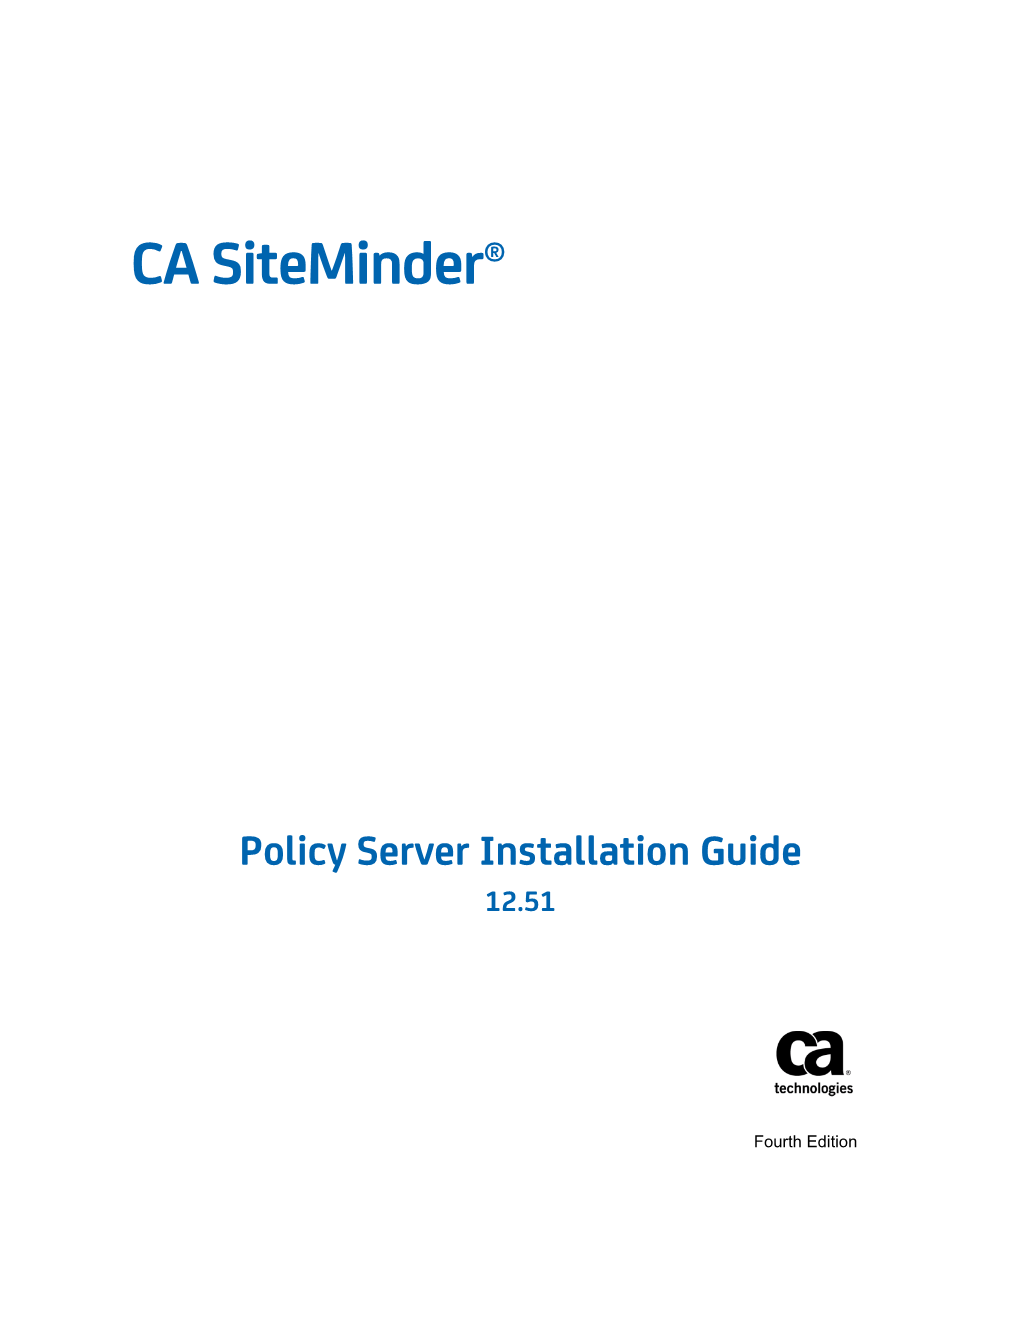 Policy Server Installation Guide 12.51